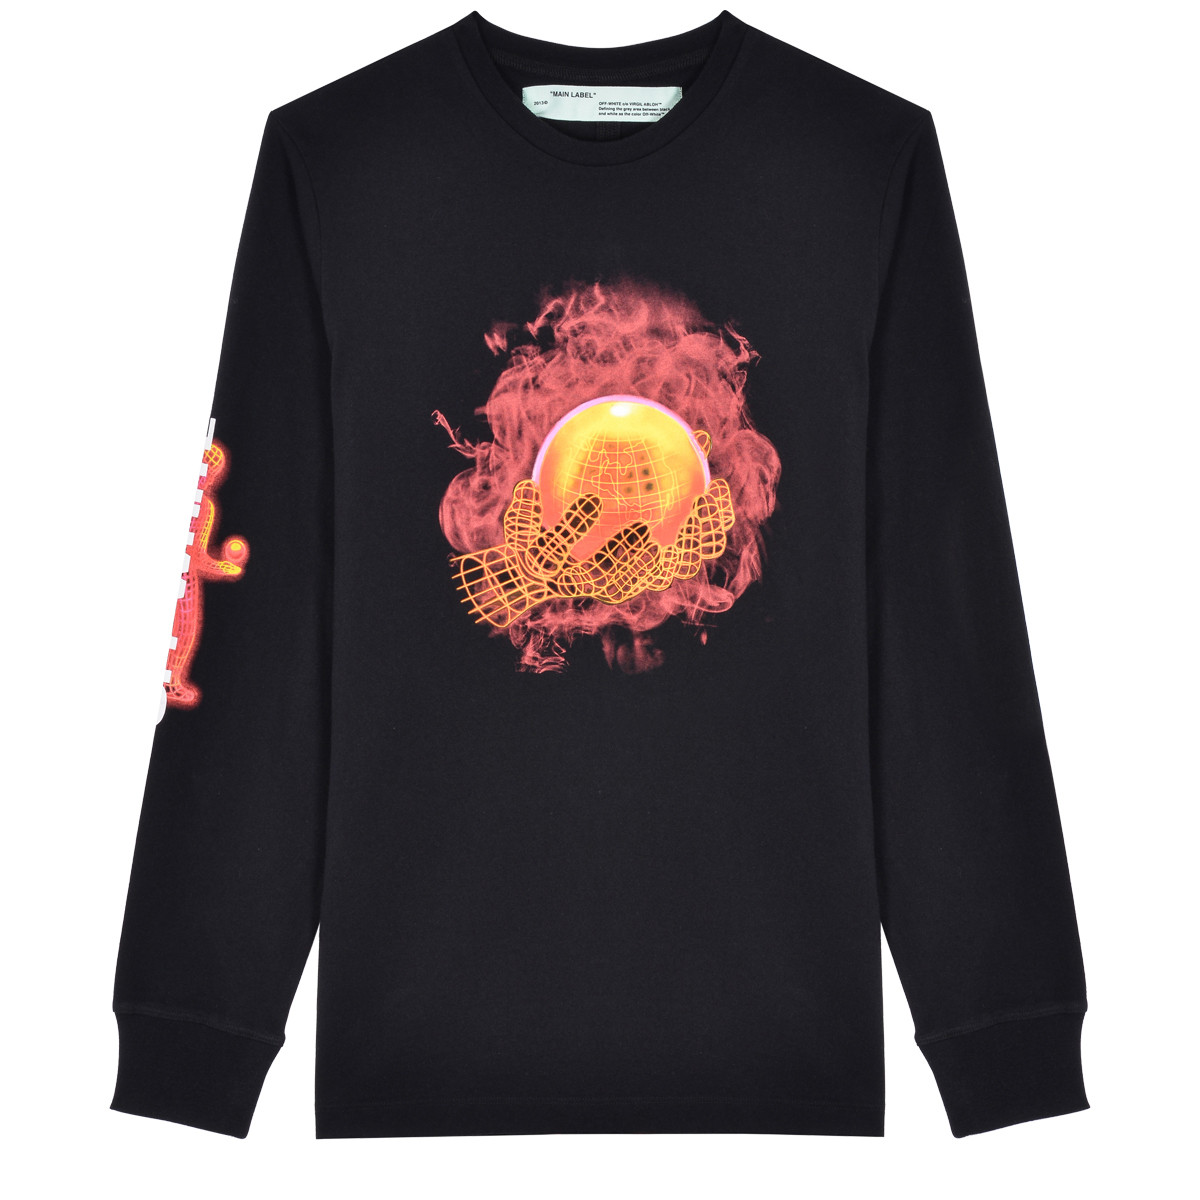 OFF-WHITE Hands and Planet L/S T-Shirt Black/Multicolor